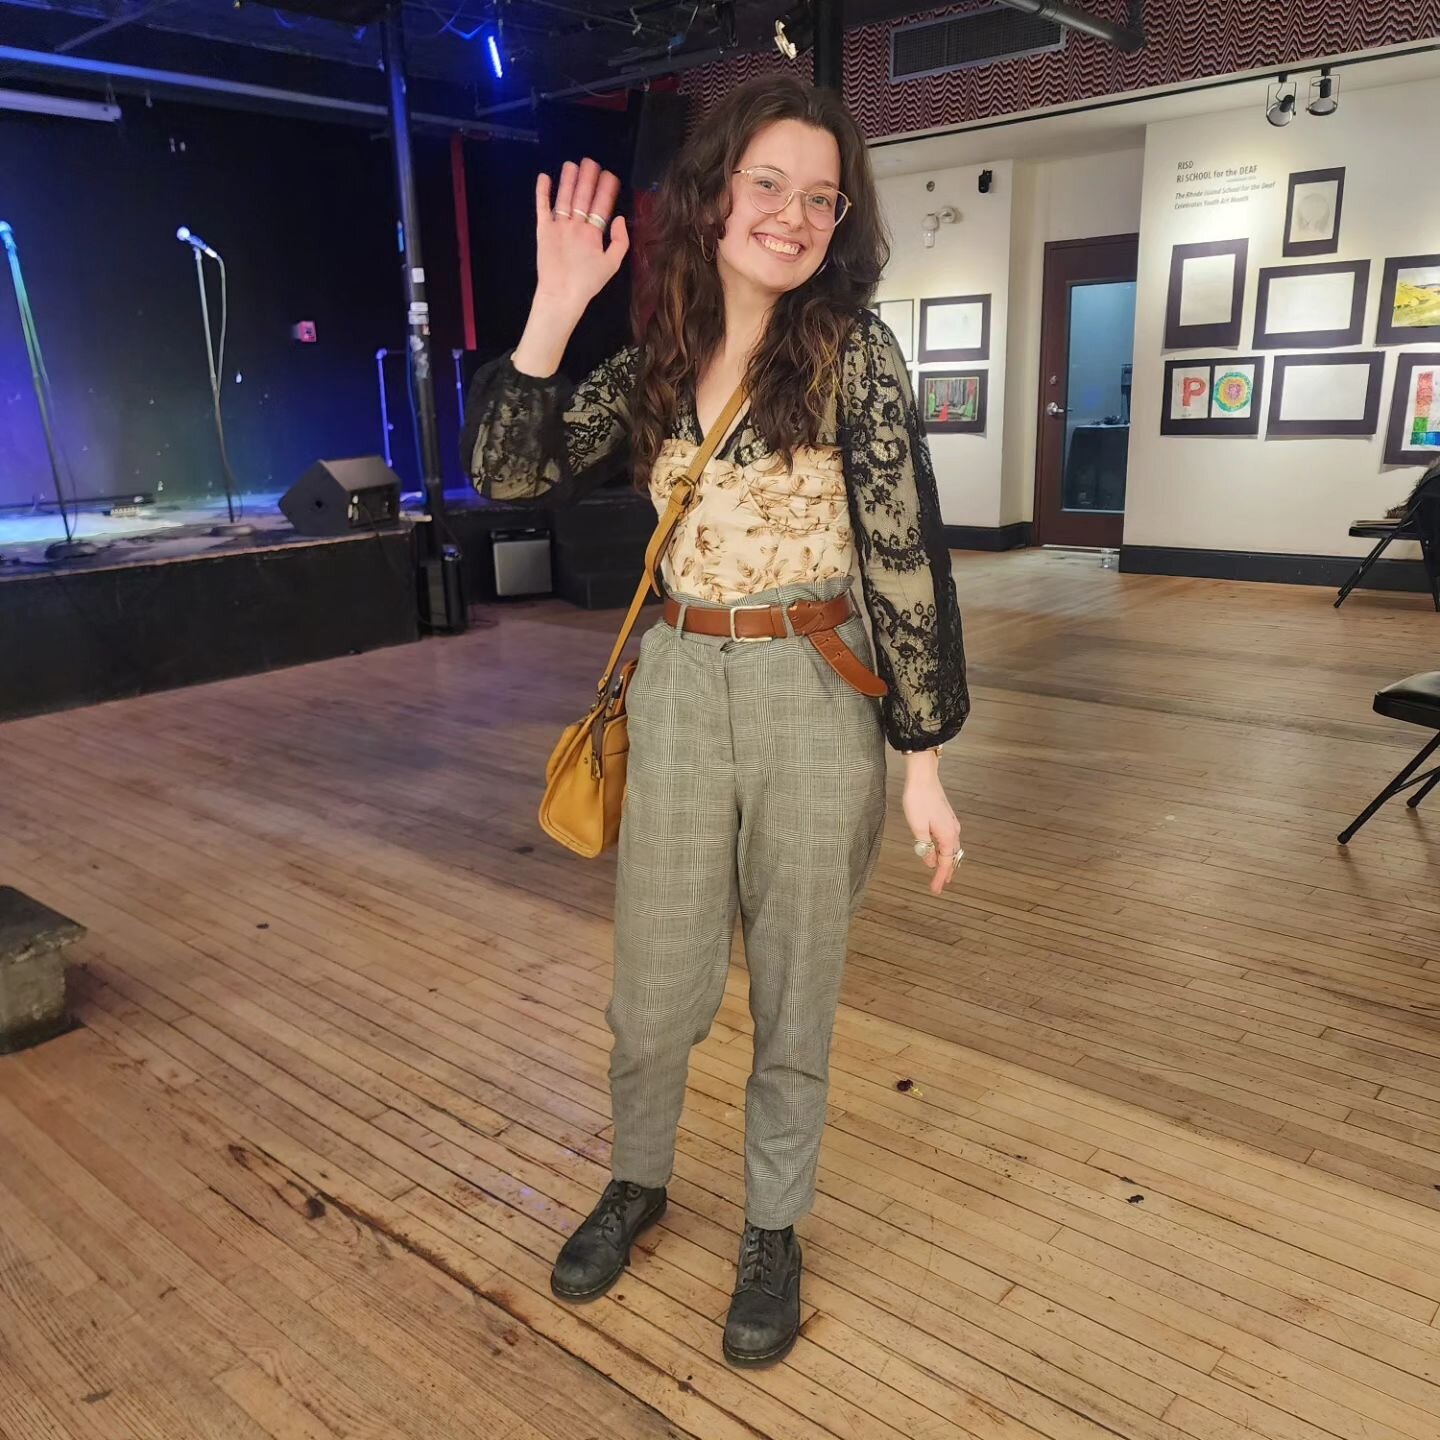 Today's edition of #ProvSlamLooks features Meg with a wonderful ensemble of patterns and textures. Plus a matching notebook and bag!? Stunning. Thanks for posing, Meg! 
.
We hope yall #pleasecomeback for our next show THIS THURSDAY March 21 for an op